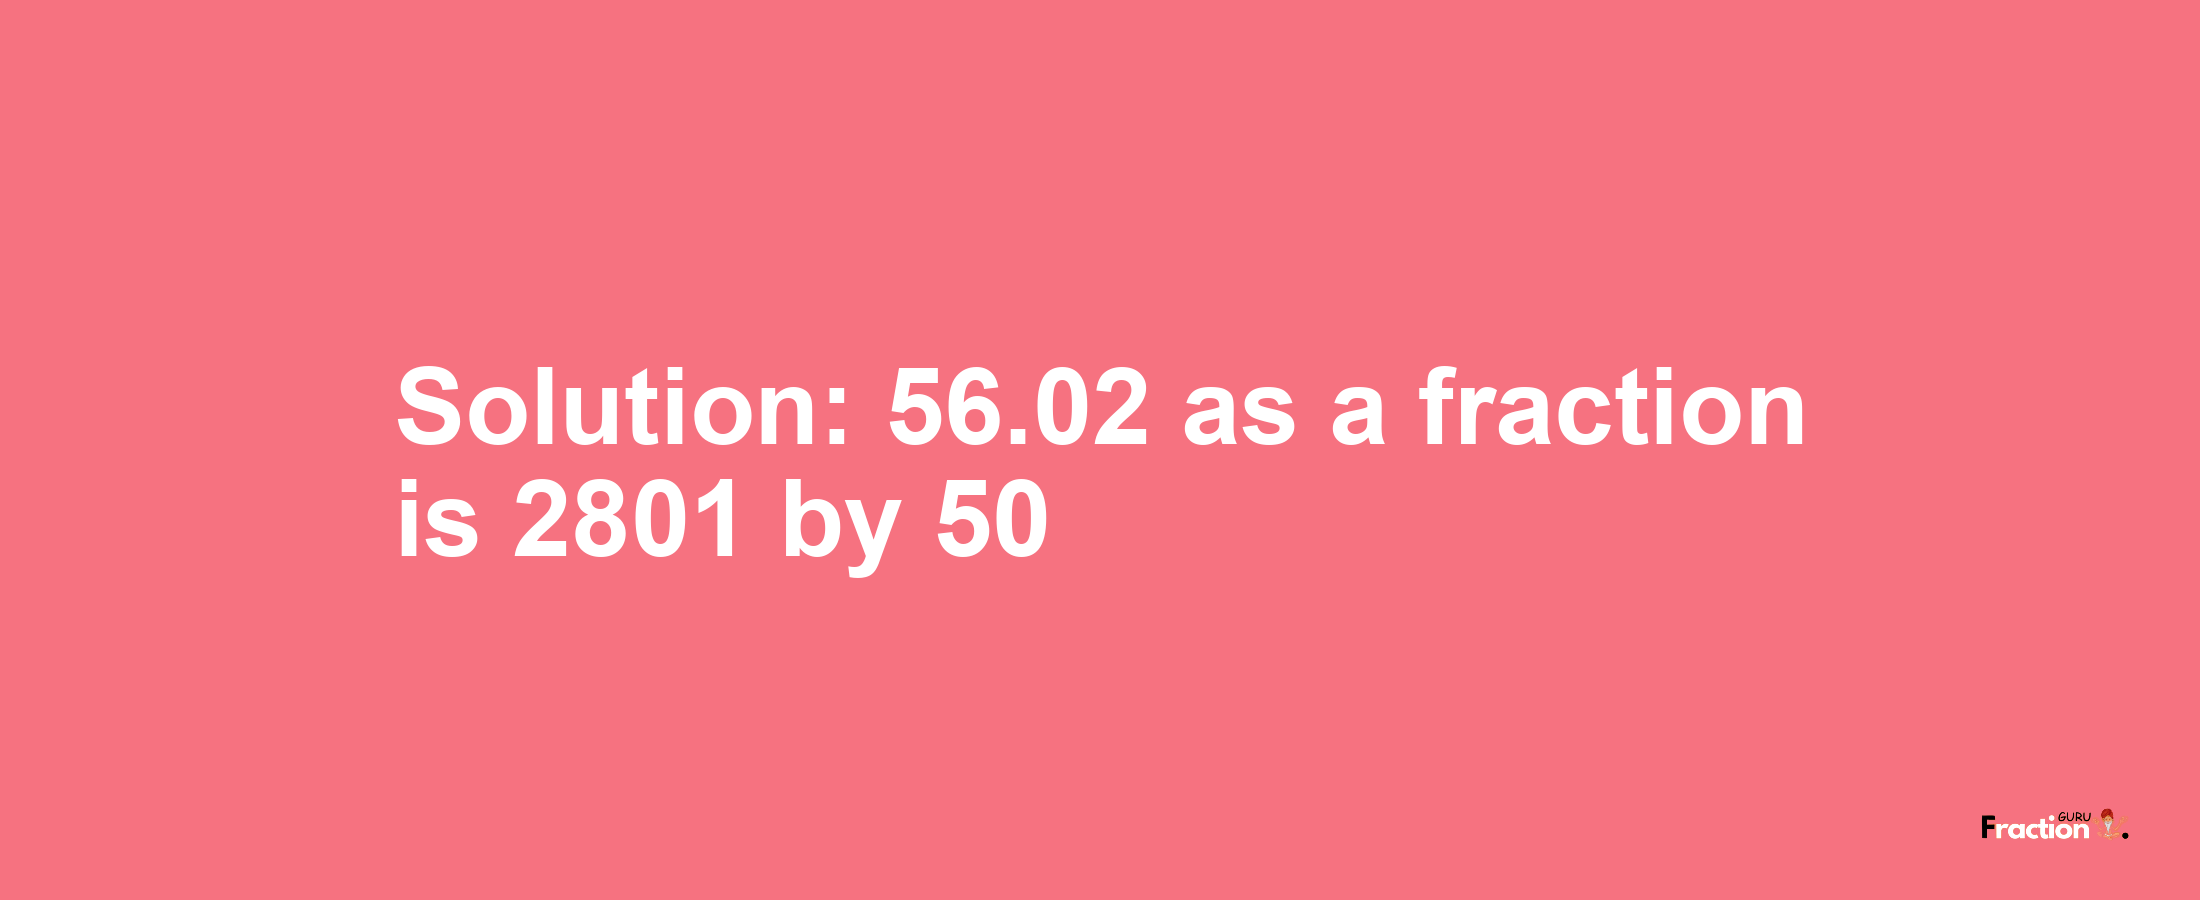 Solution:56.02 as a fraction is 2801/50